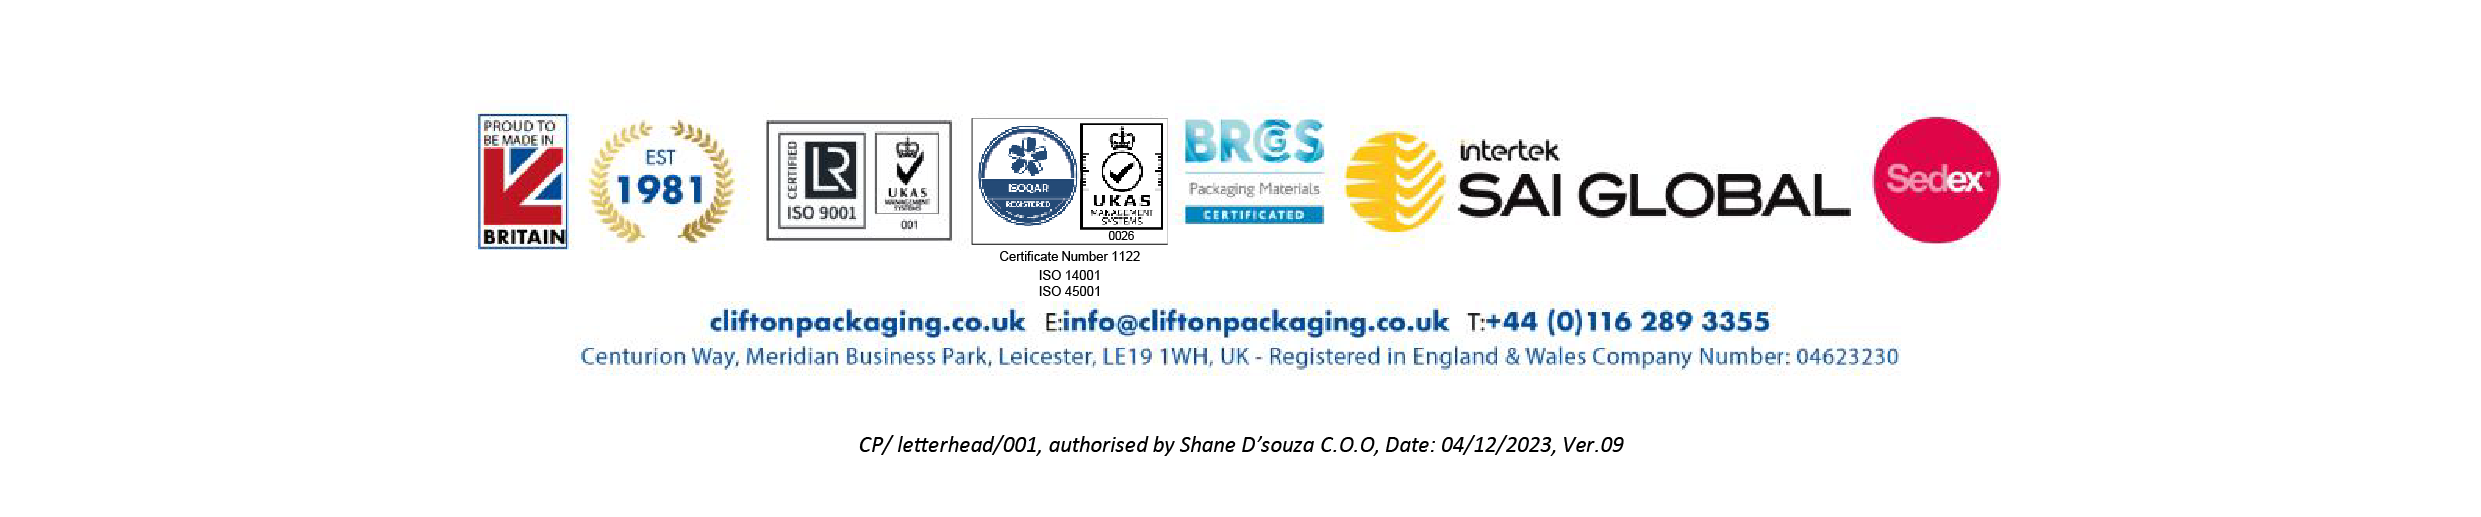 Accreditation, Clifton Packaging Group LTD, packaging, flexible packaging, pouches, stand up pouches 